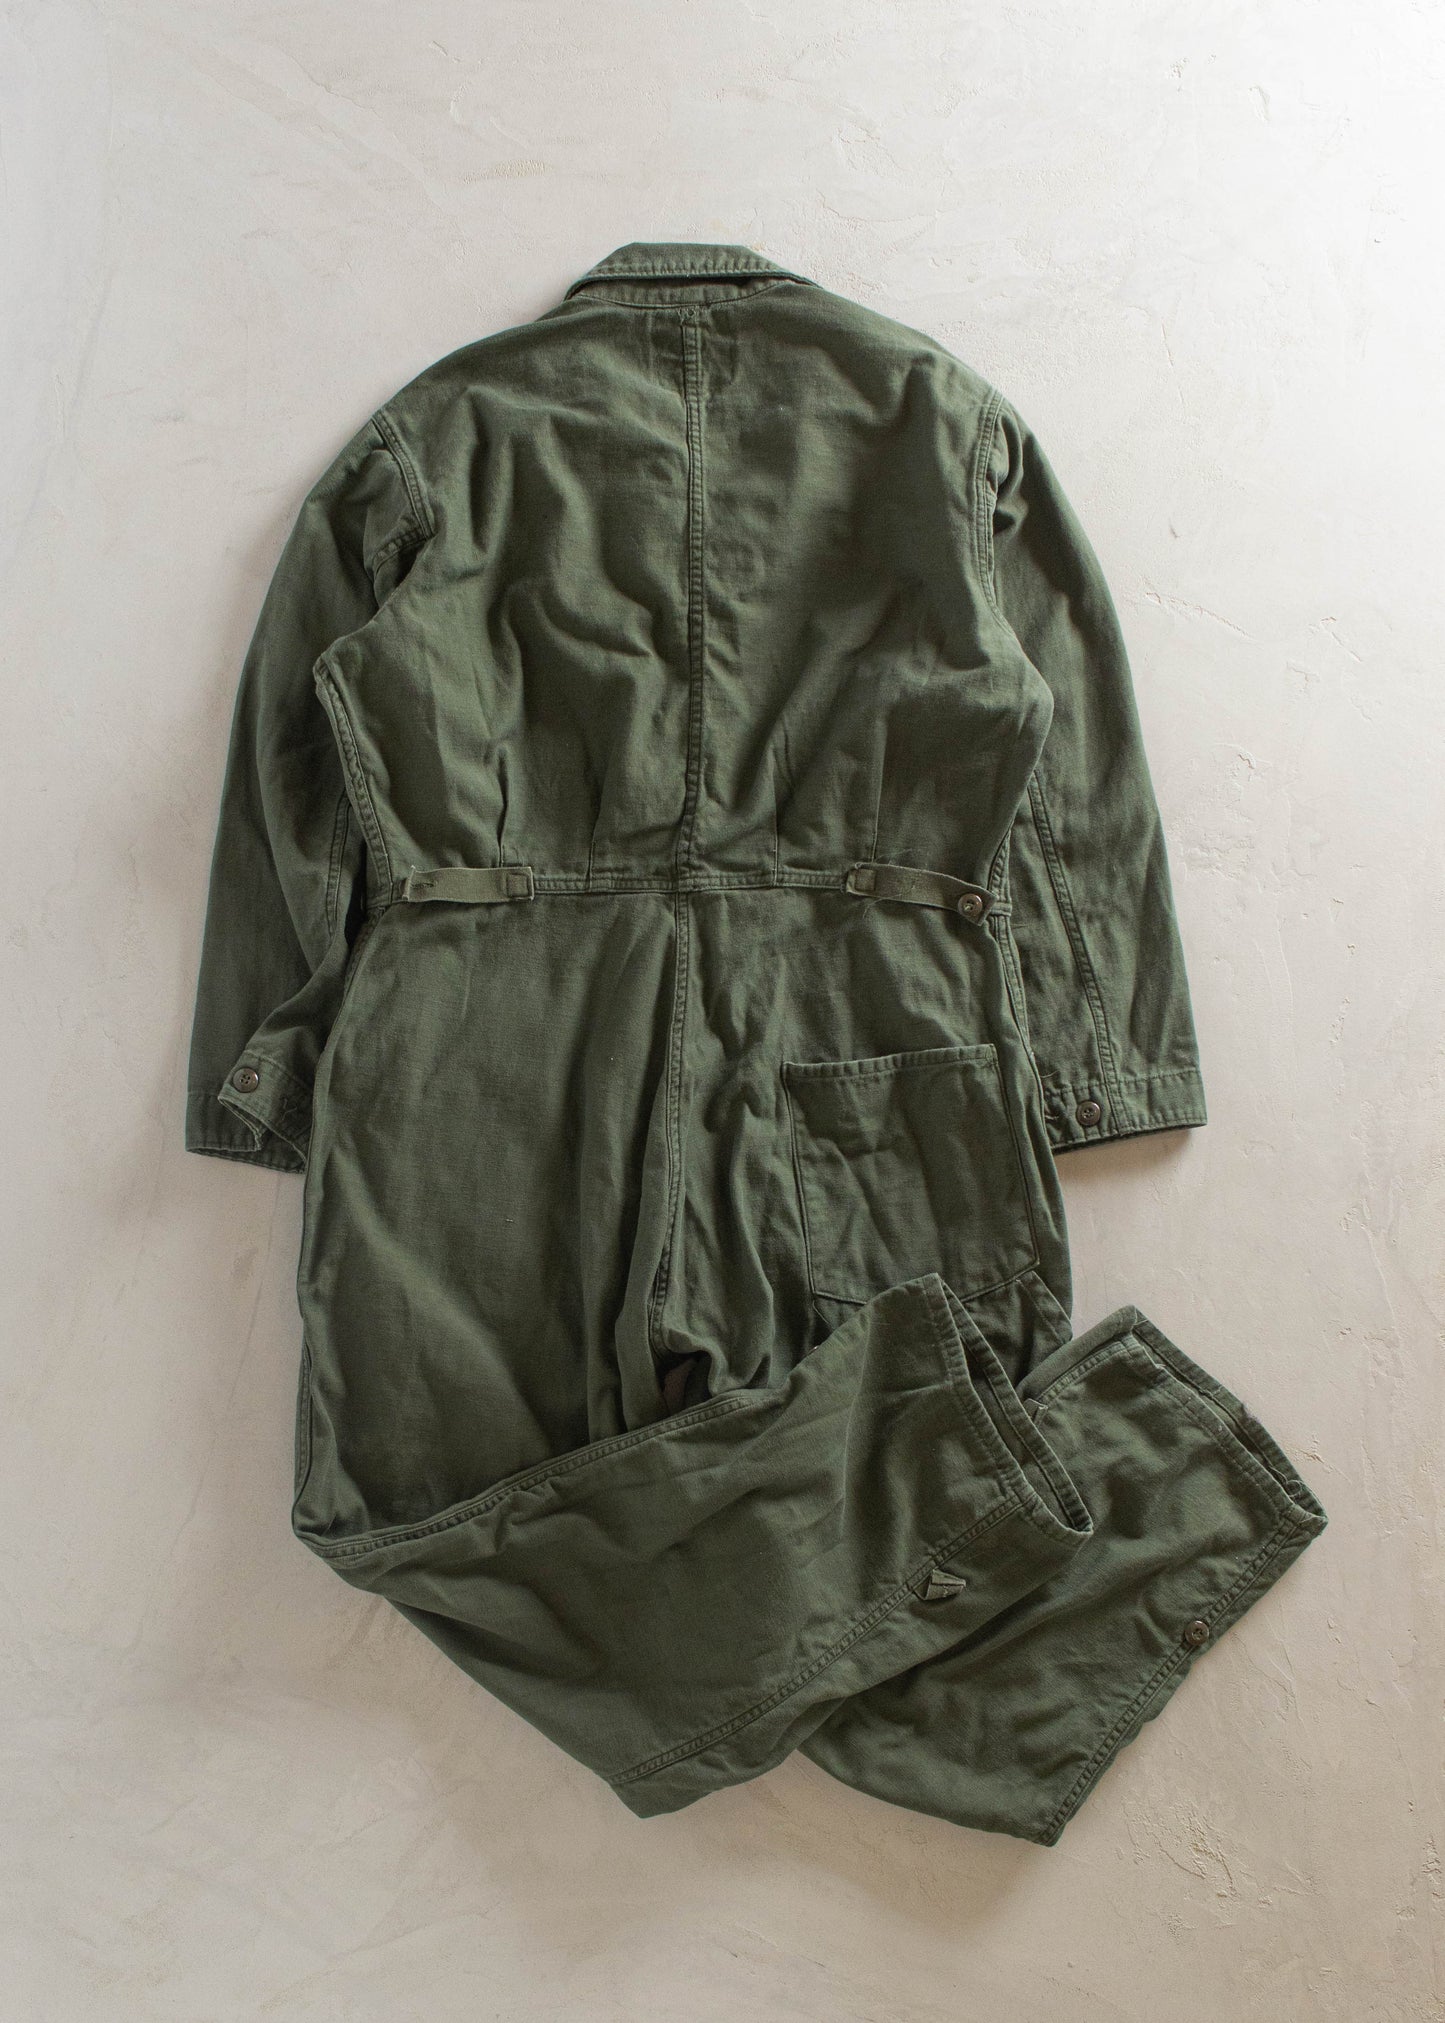 1970s OG 107 Type I Coveralls Size XL/2XL